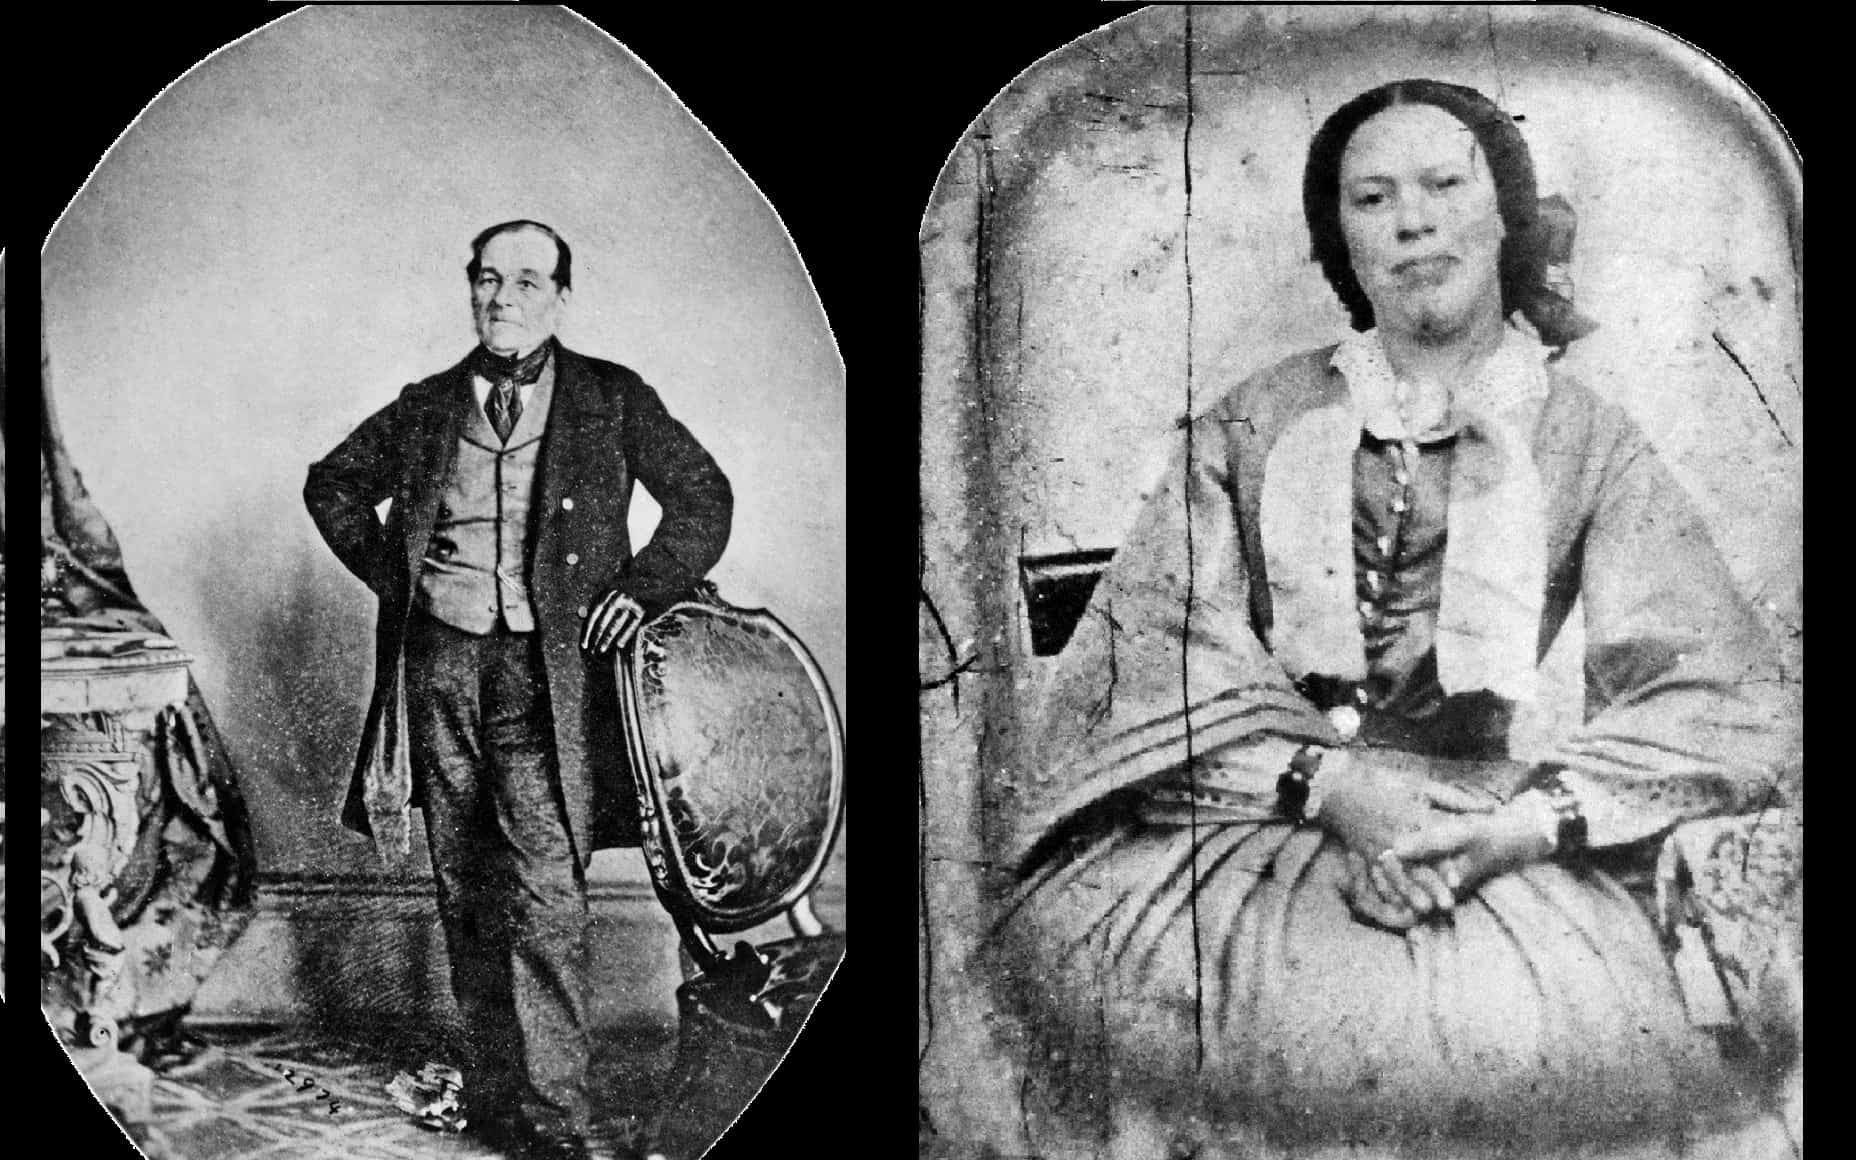 Charles Harrod in his mid-life and an ambrotype of wife, Elizabeth Digby between 1850-1860. Photos by Harrods